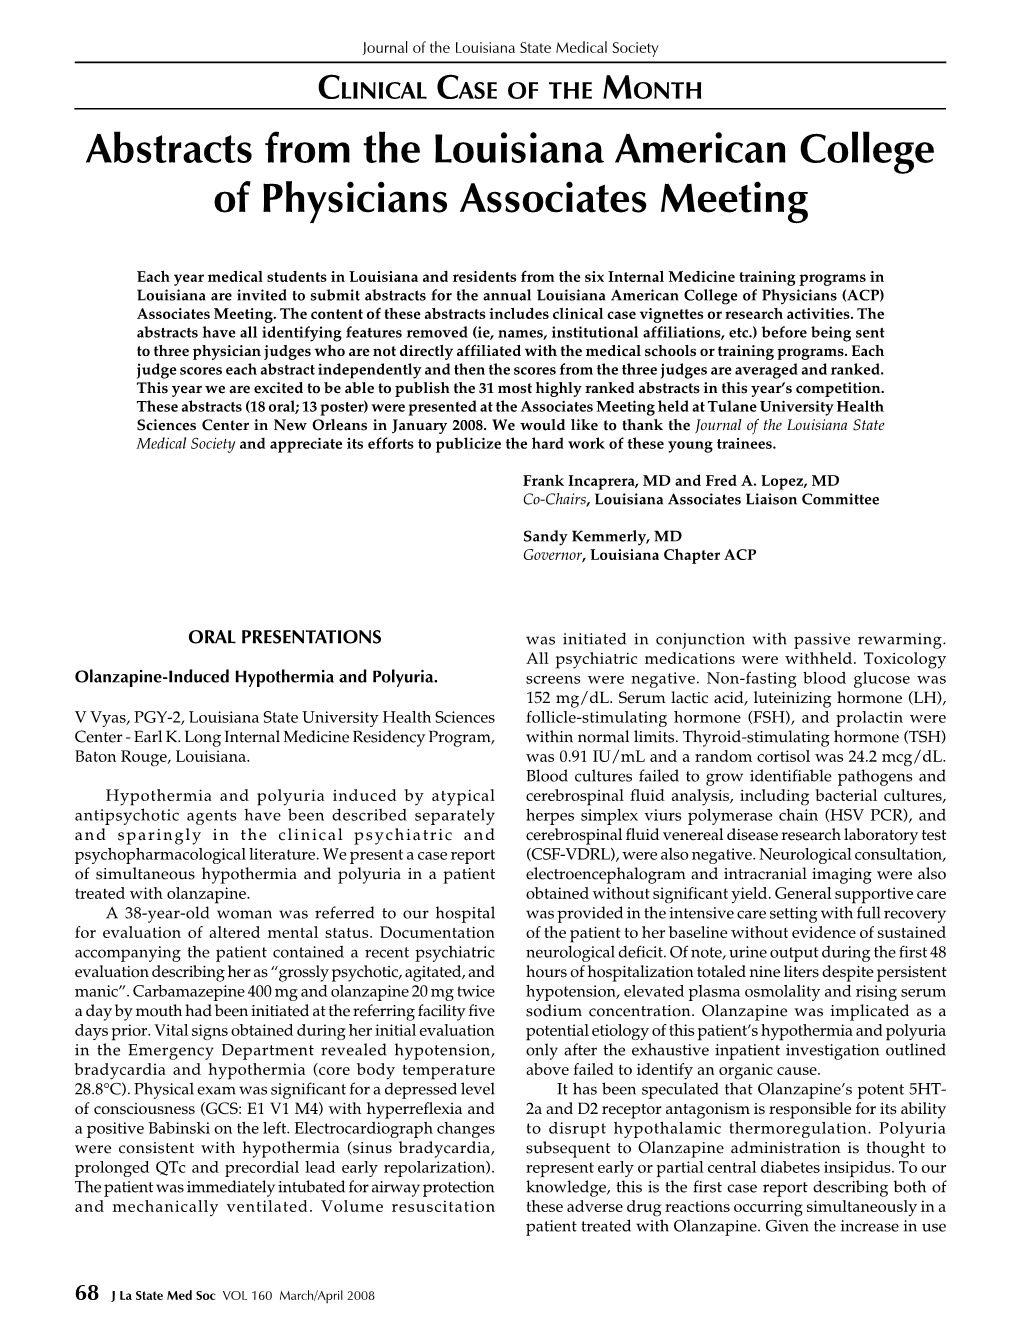 Abstracts from the Louisiana American College of Physicians Associates Meeting